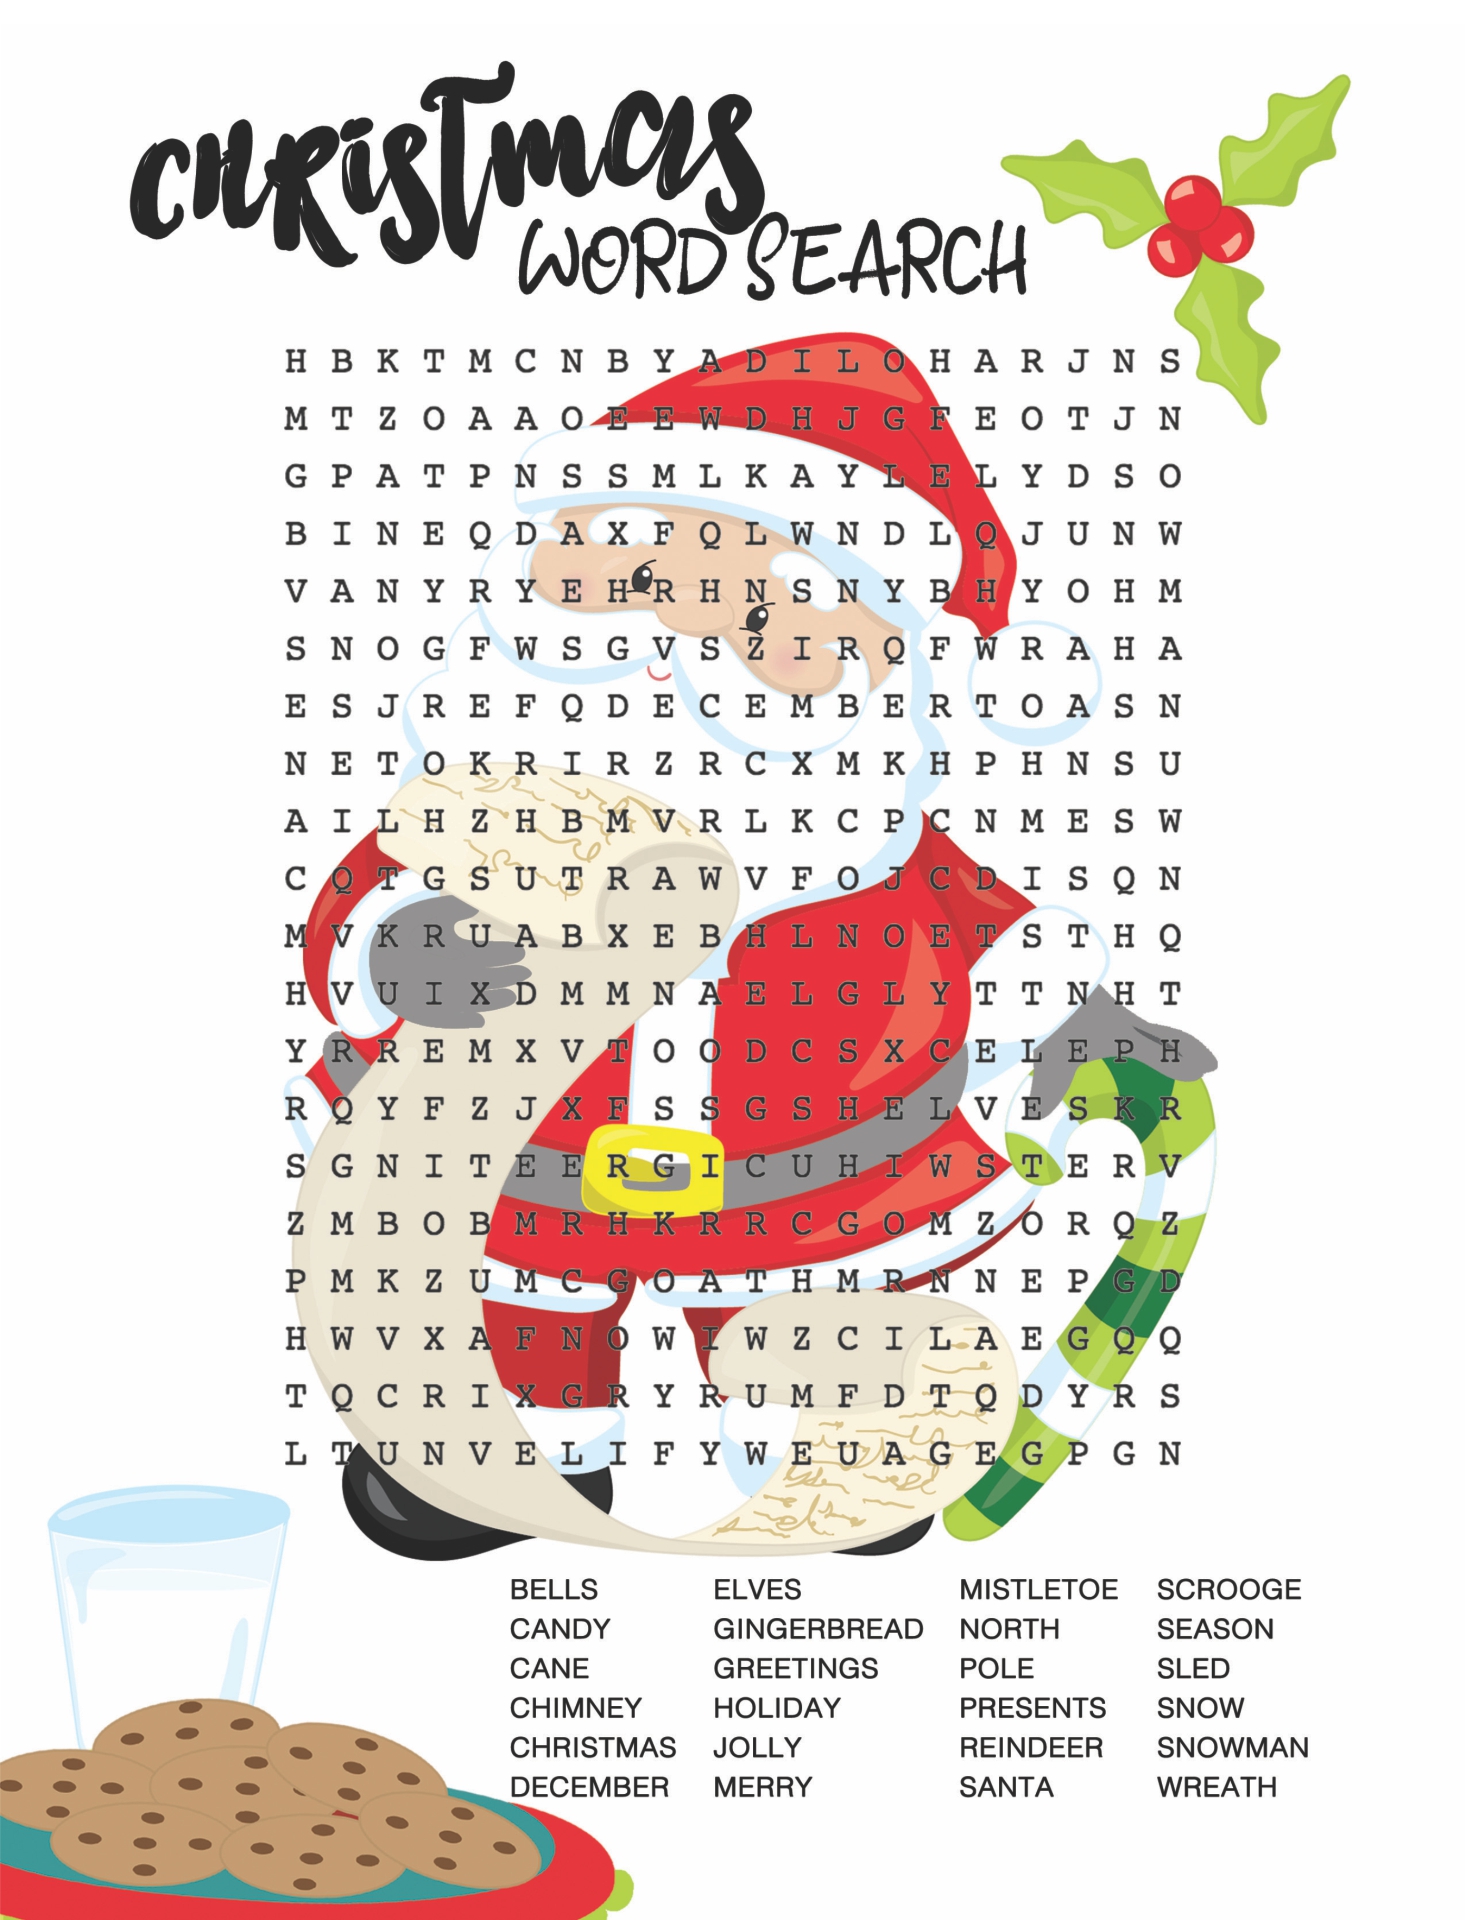 6-best-images-of-big-printable-christmas-word-searches-christmas-word